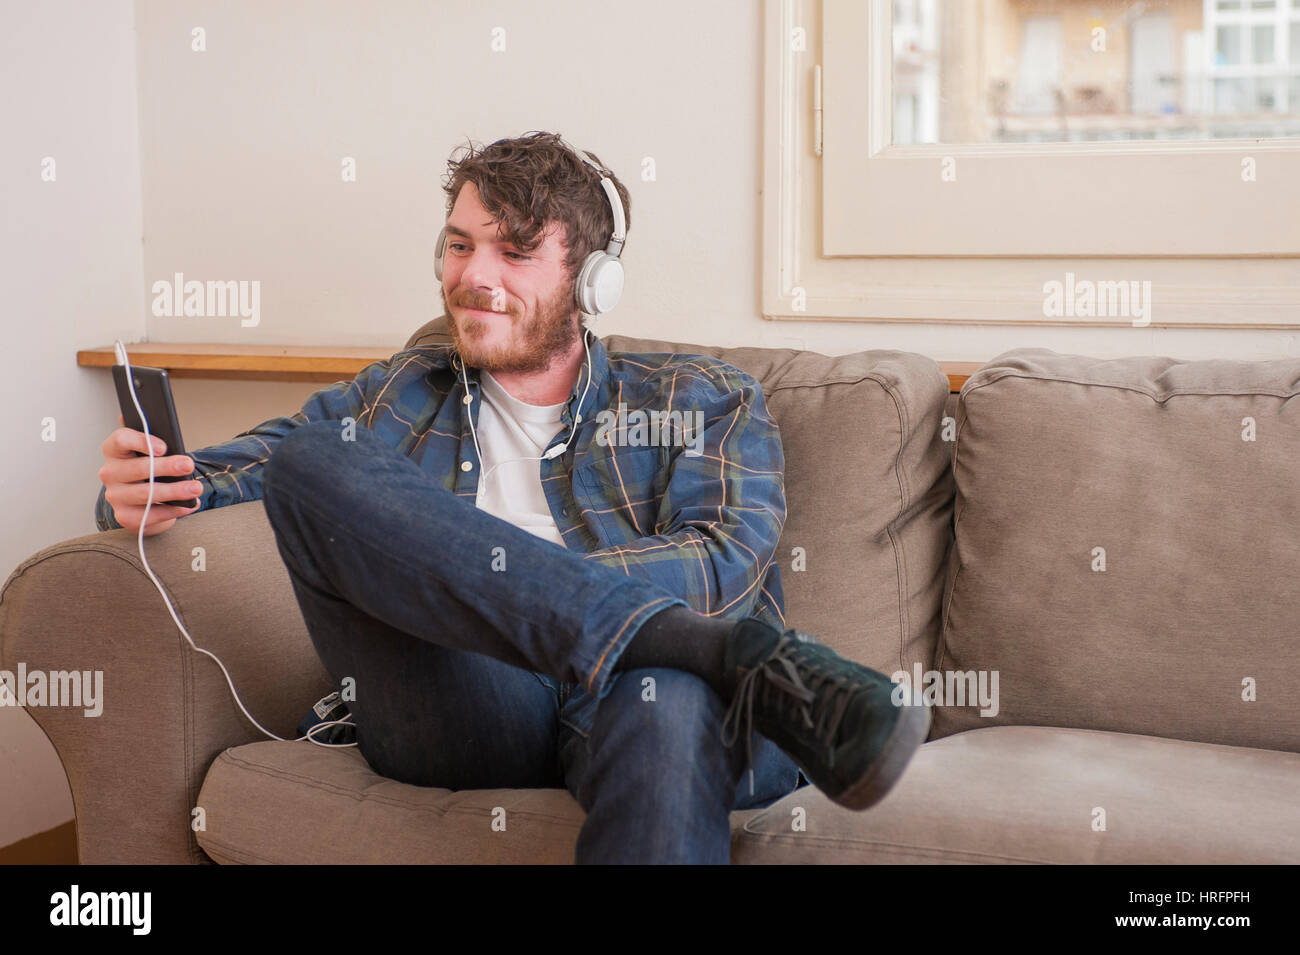 Young man at his living room with a plaid shirt listening to music Stock Photo